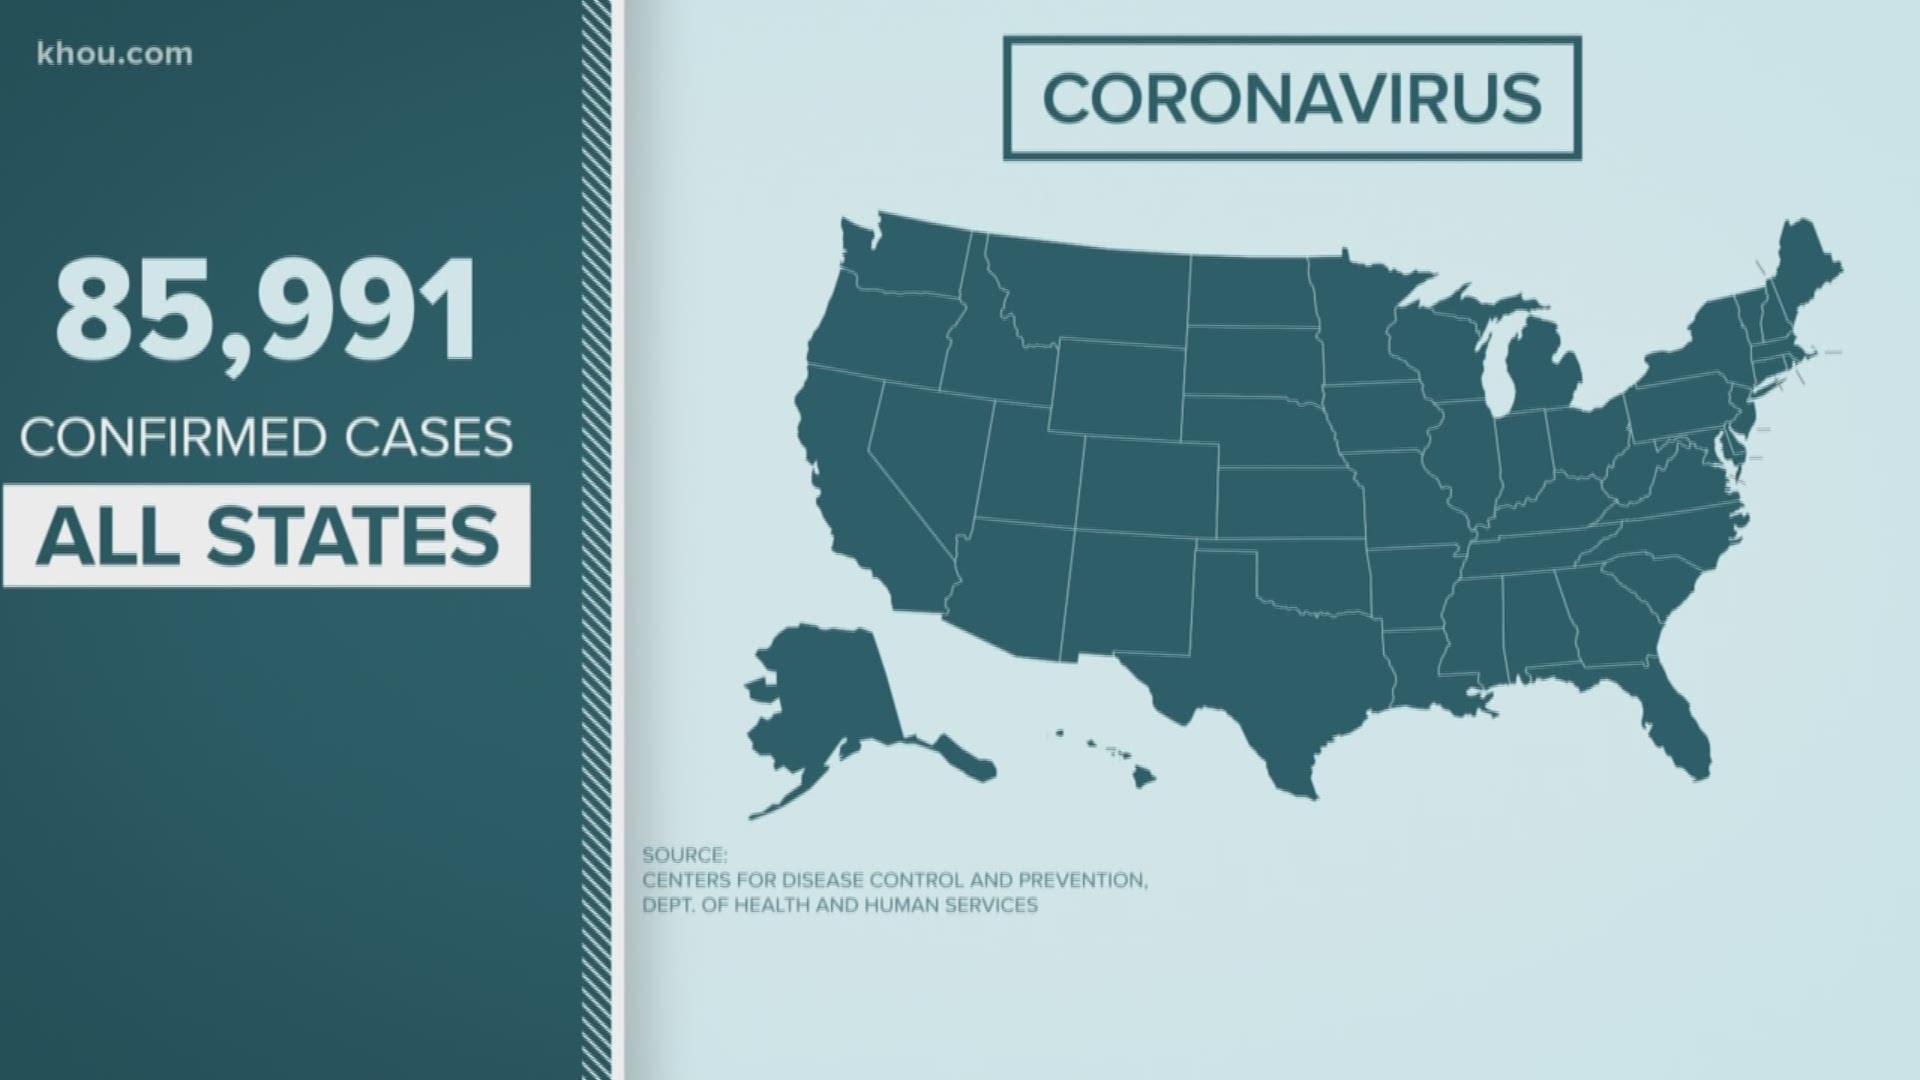 The U.S. now leads the world with the highest number of confirmed coronavirus cases -- reaching nearly 86,000 as of Friday, March 27.